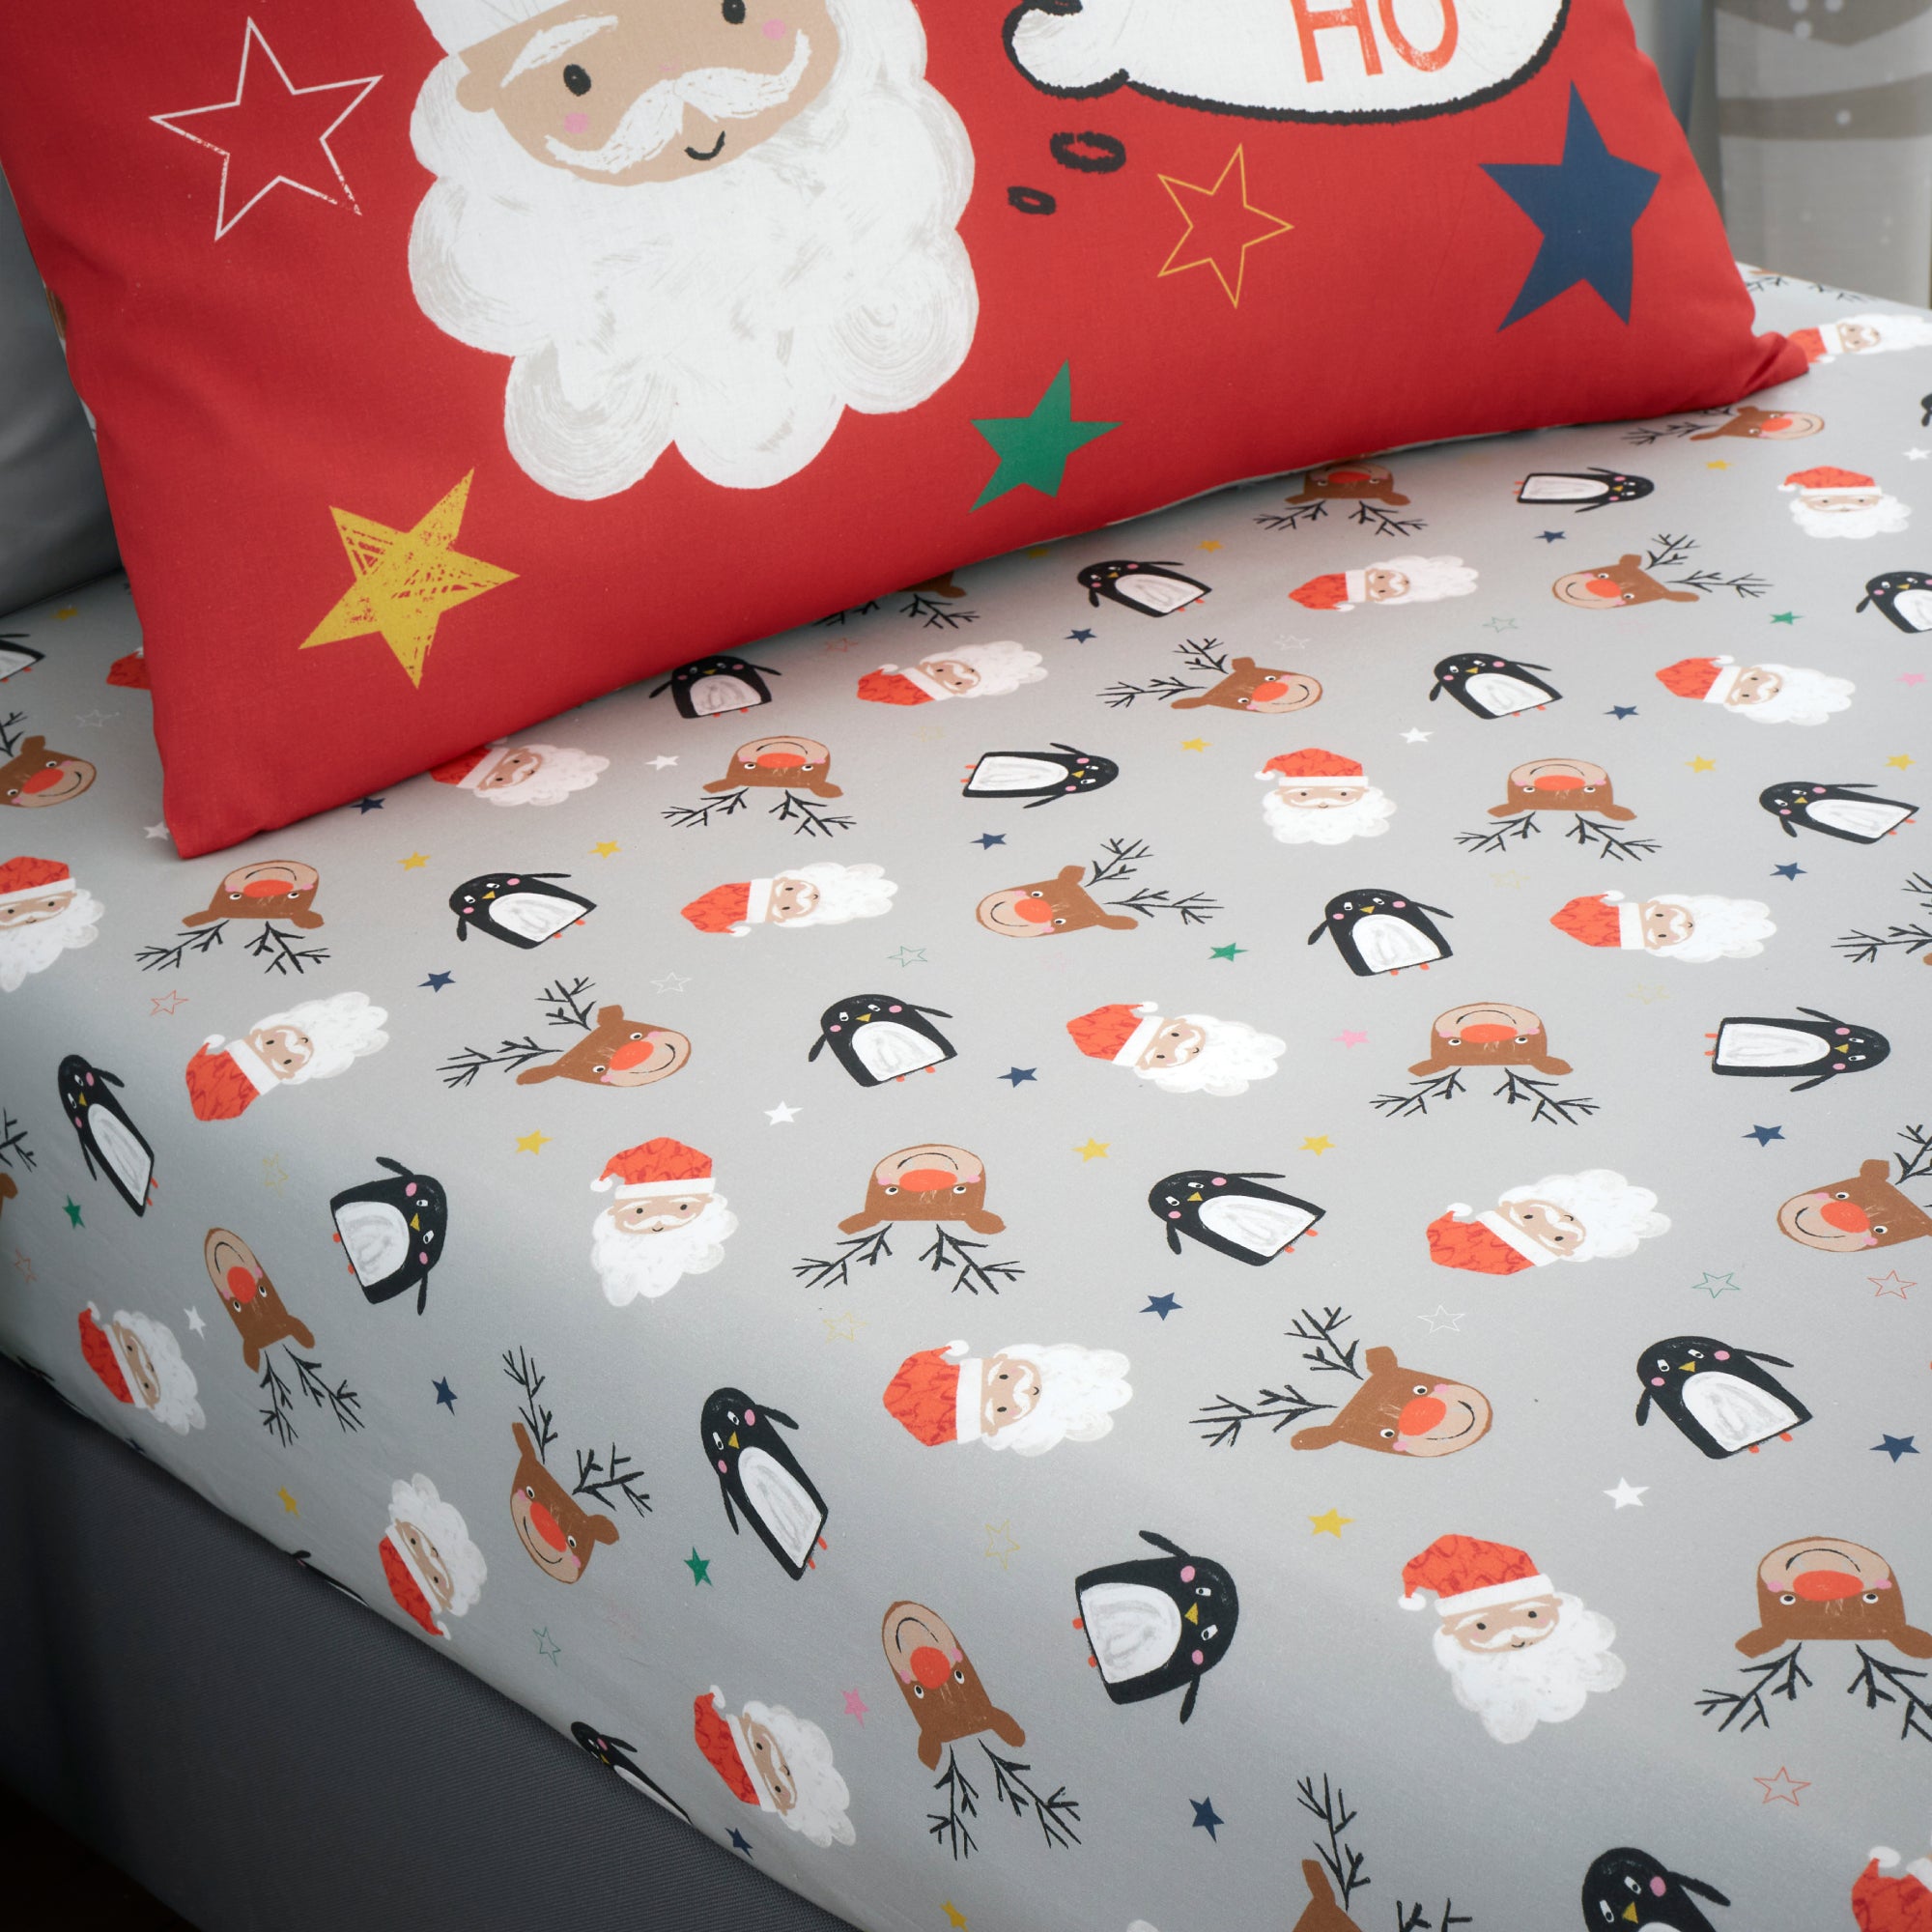 25cm Fitted Bed Sheet Ho Ho Ho by Bedlam in Red